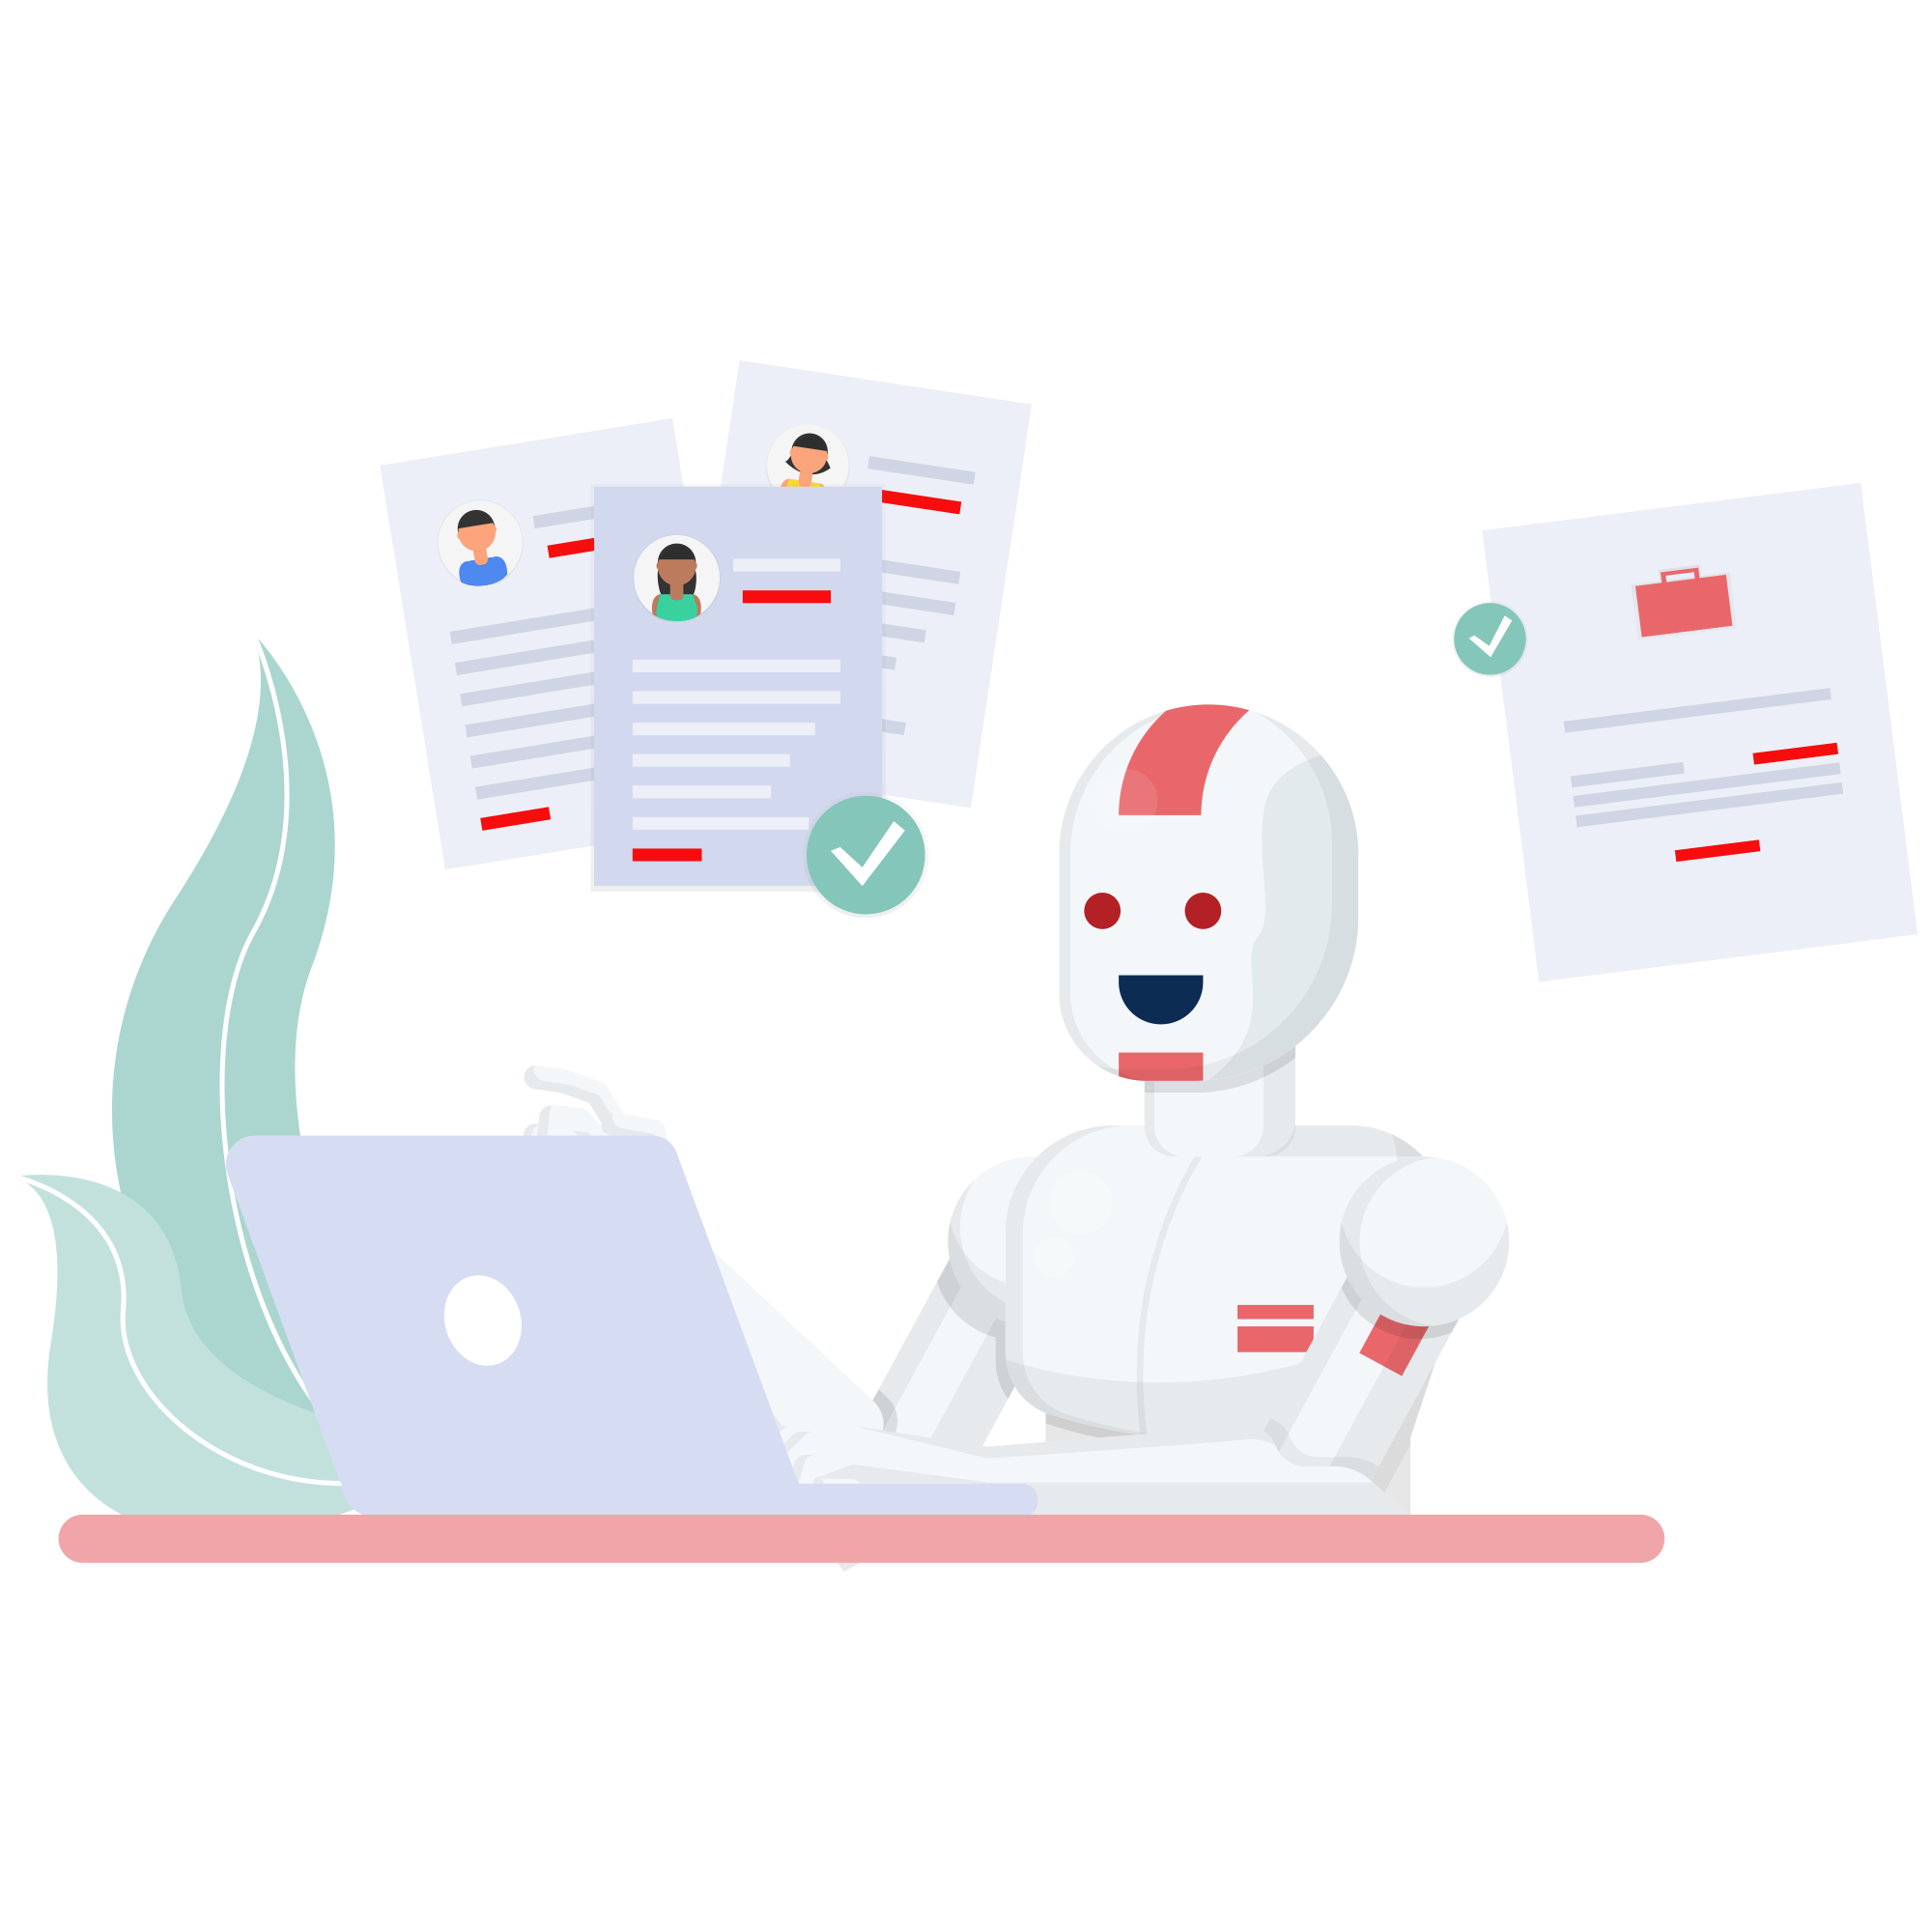 Zia understands candidates as humans with career profiles instead of a string of keywords. While conversing with candidates, Zia asks for more details about their work experience, previous company information, and more, and that data gets automatically populated into your system.